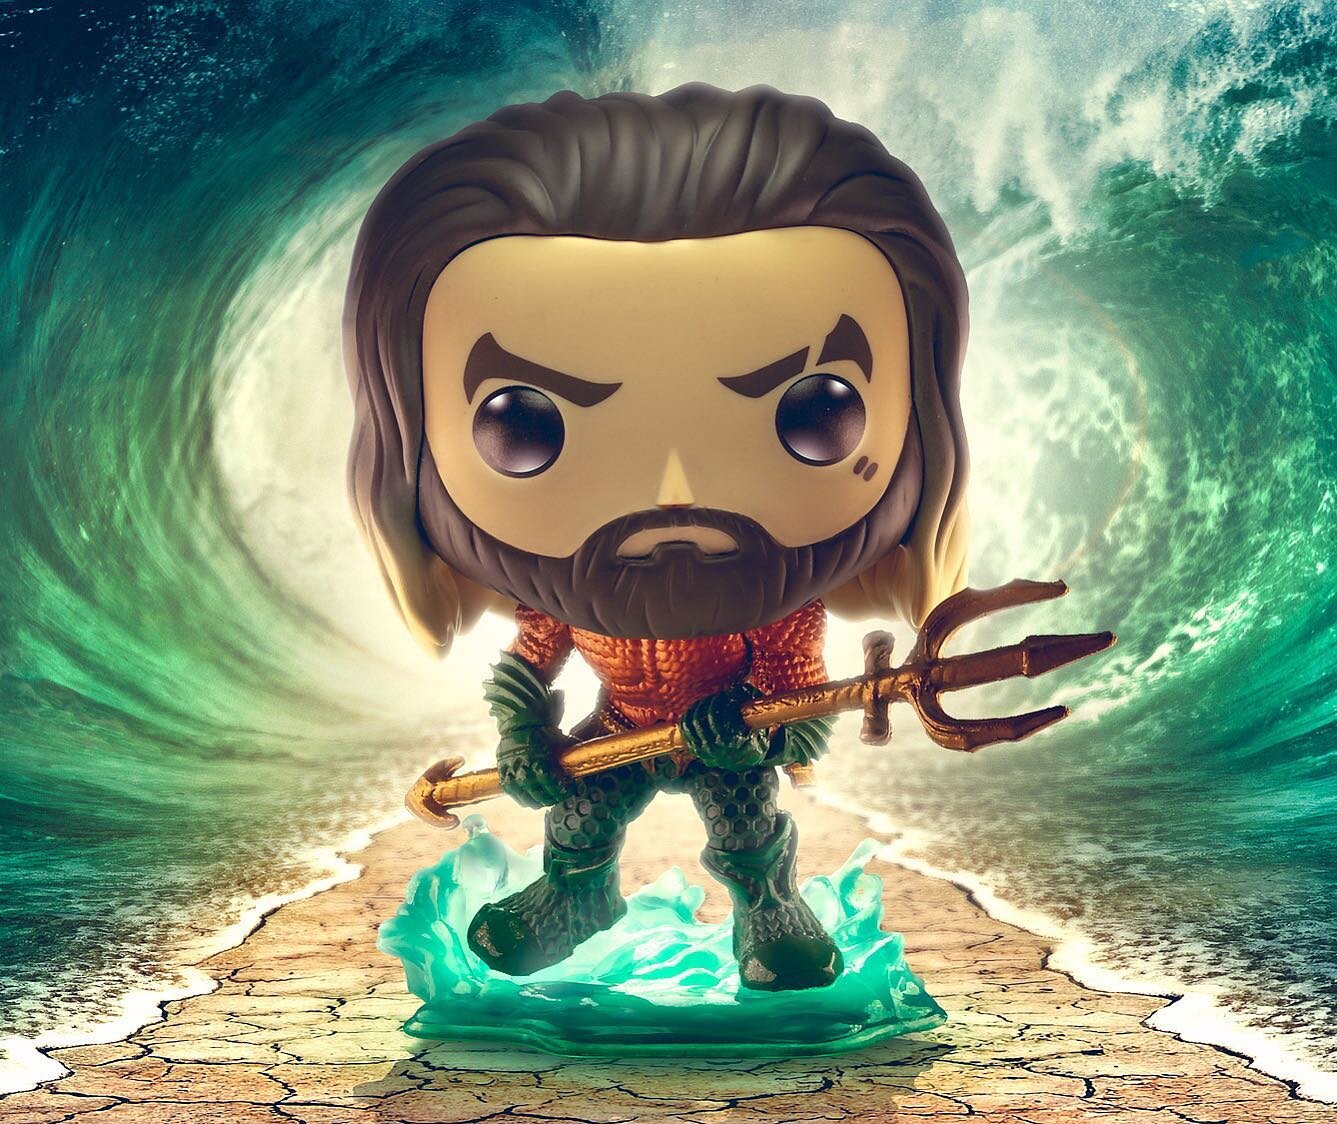 Let&rsquo;s welcome the latest addition to our DC highlights section, the King of Atlantis, Aquaman!

&mdash;&mdash;&mdash;&mdash;&mdash;&mdash;&mdash;&mdash;&mdash;&mdash;&mdash;
🍽 @darksidepoa
📸 @darksidegalleries
🙏🏻 @originalfunko
&mdash;&mdas